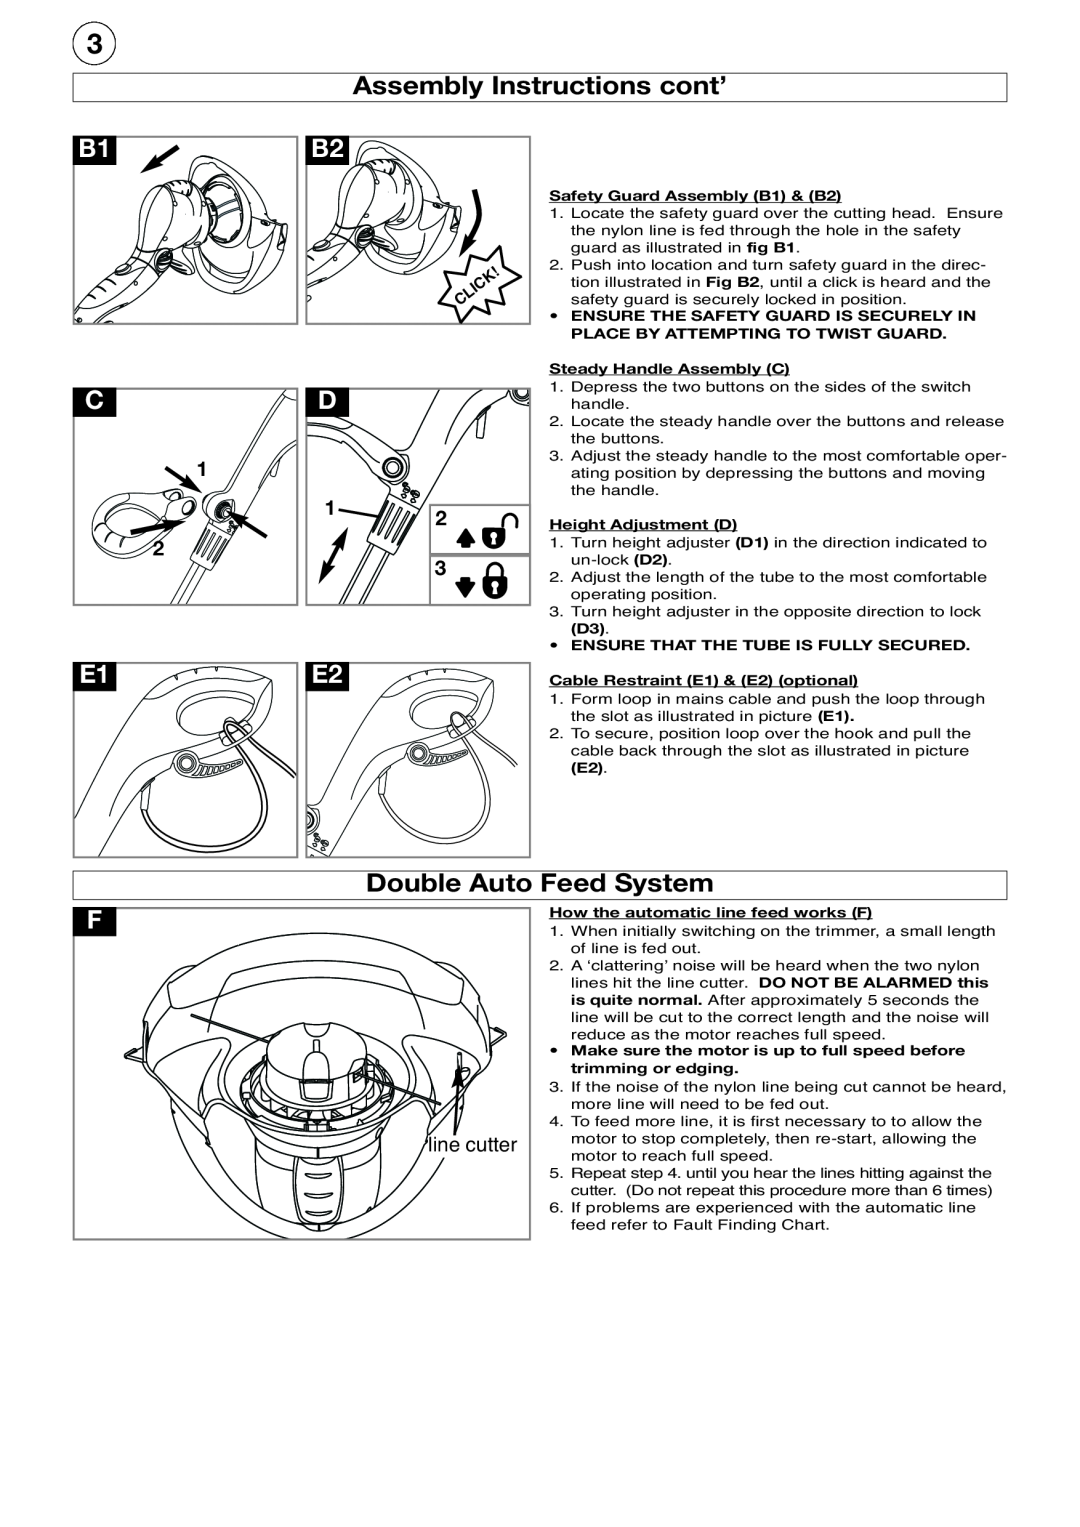 Flymo 500 XT manual Assembly Instructions cont’, E1 F, Double Auto Feed System, line cutter 